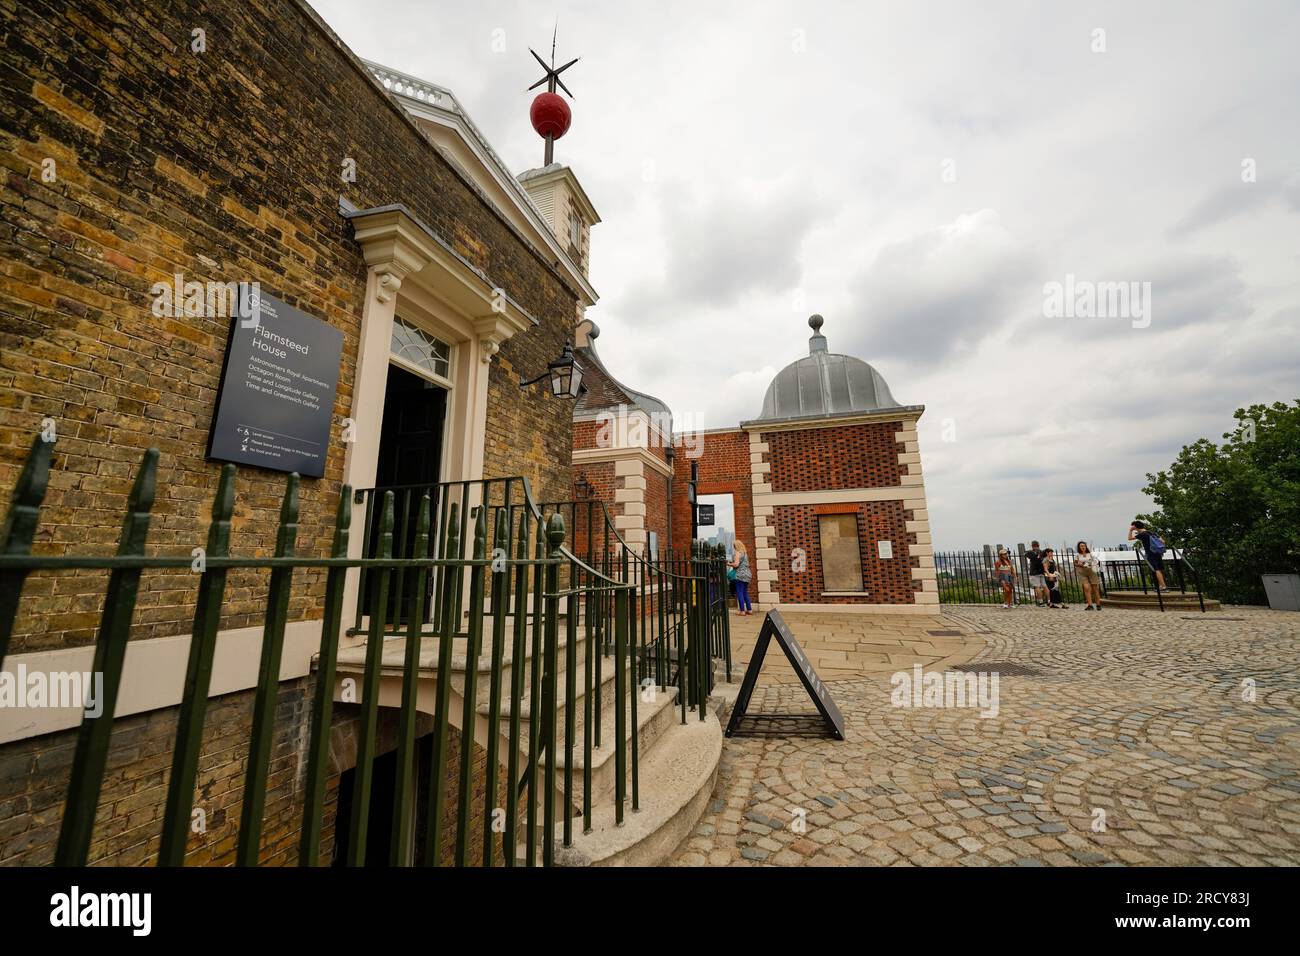 Royal Observatory Greenwich, London. Visitors at the Flamsteed House wait for the red Time Ball to drop. Visit the Octagon Room, Prime Meridian Line. Stock Photo